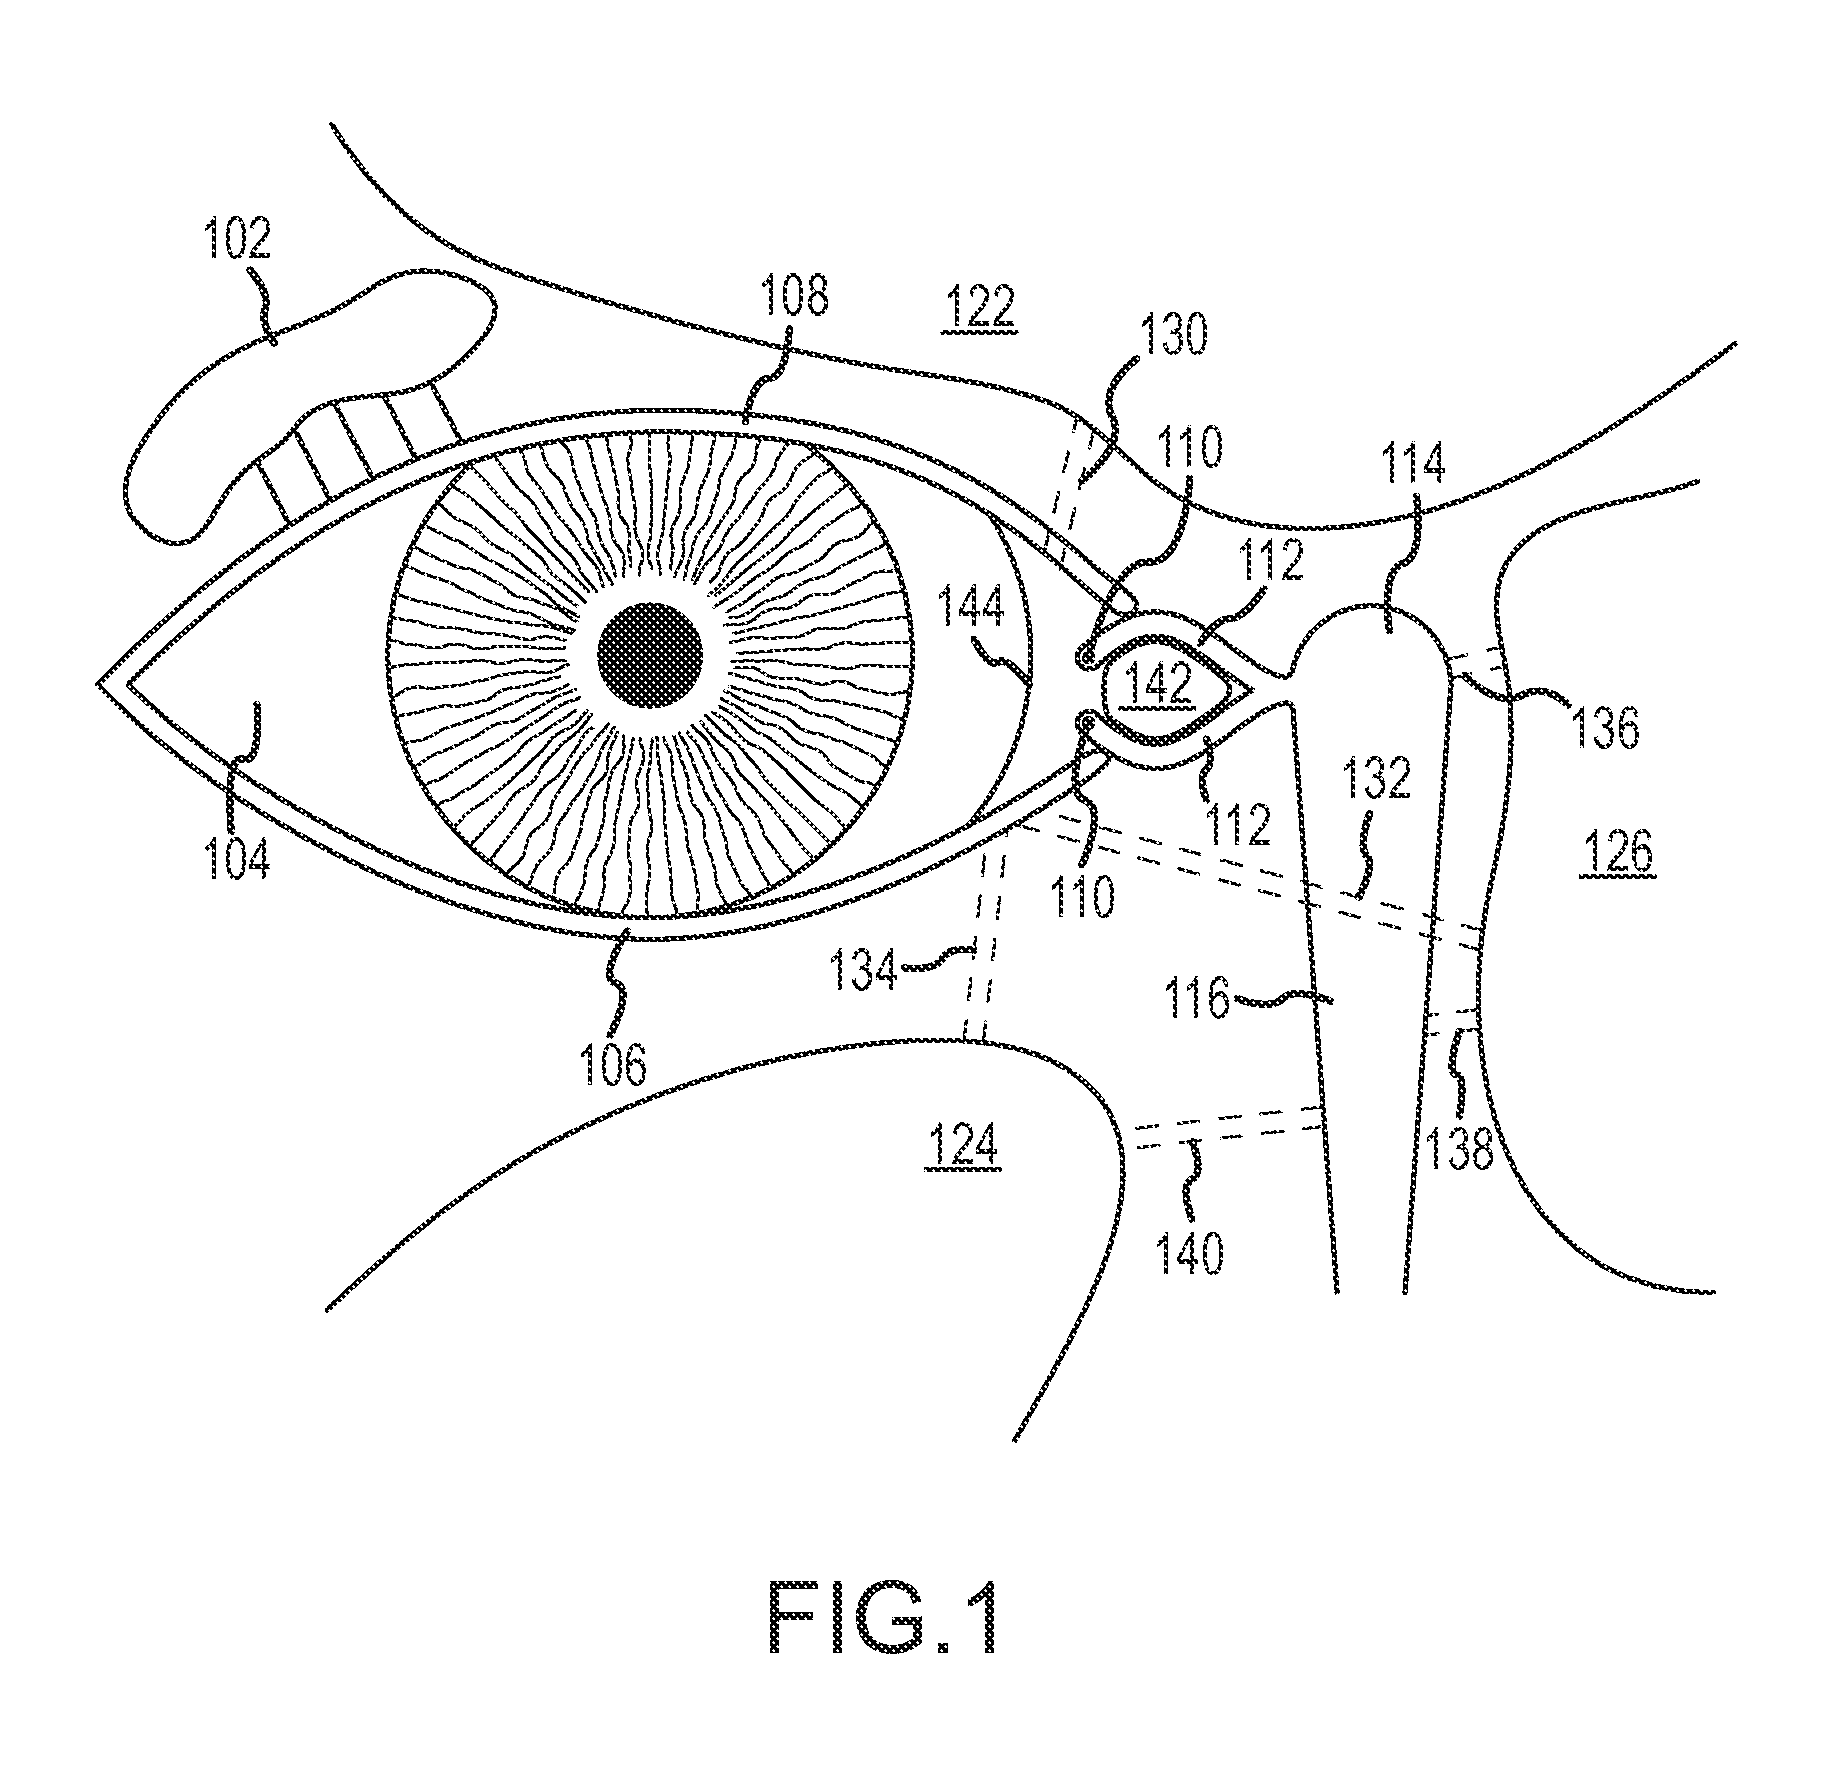 Paranasal sinus access implant devices and related tools, methods and kits